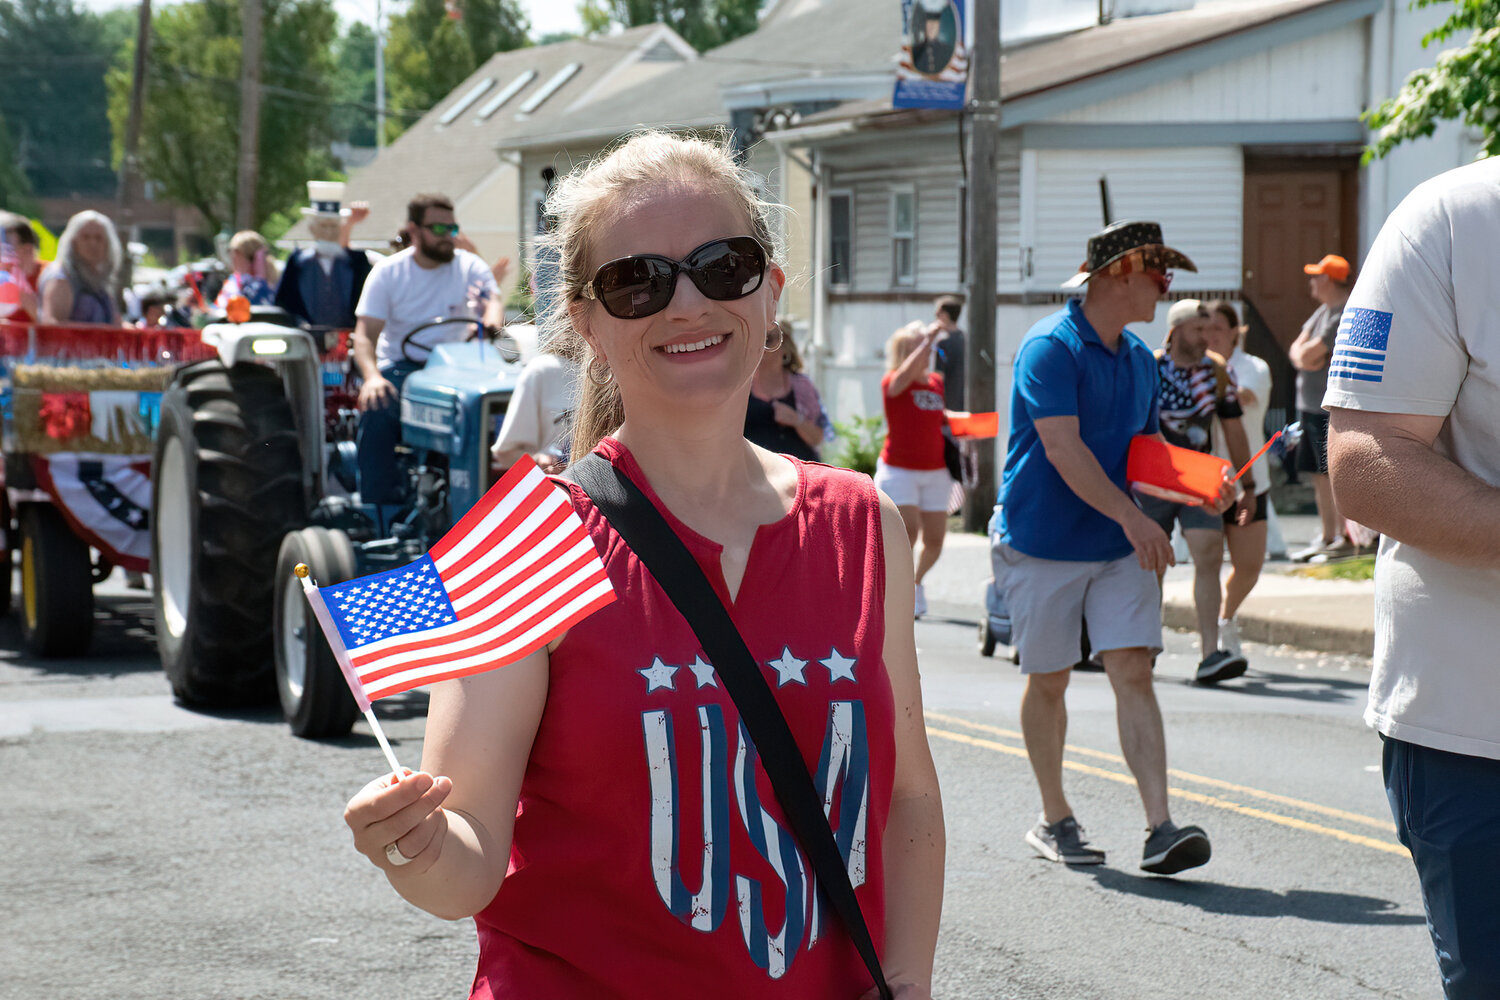 One of the many patriotic community members who participated in the parade.